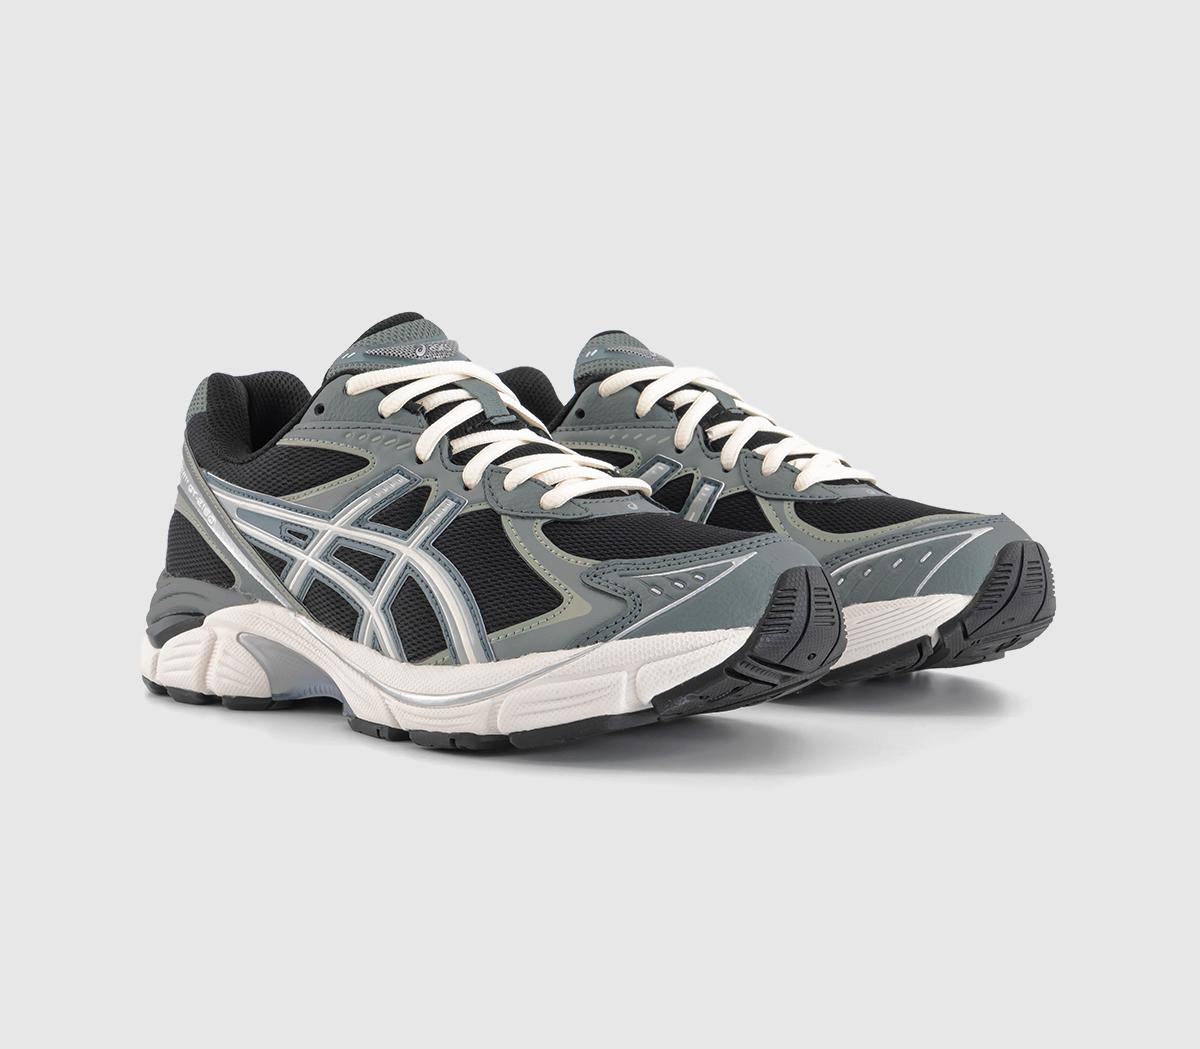 Asics Gt-2160 Trainers Black Seal Grey, 4.5